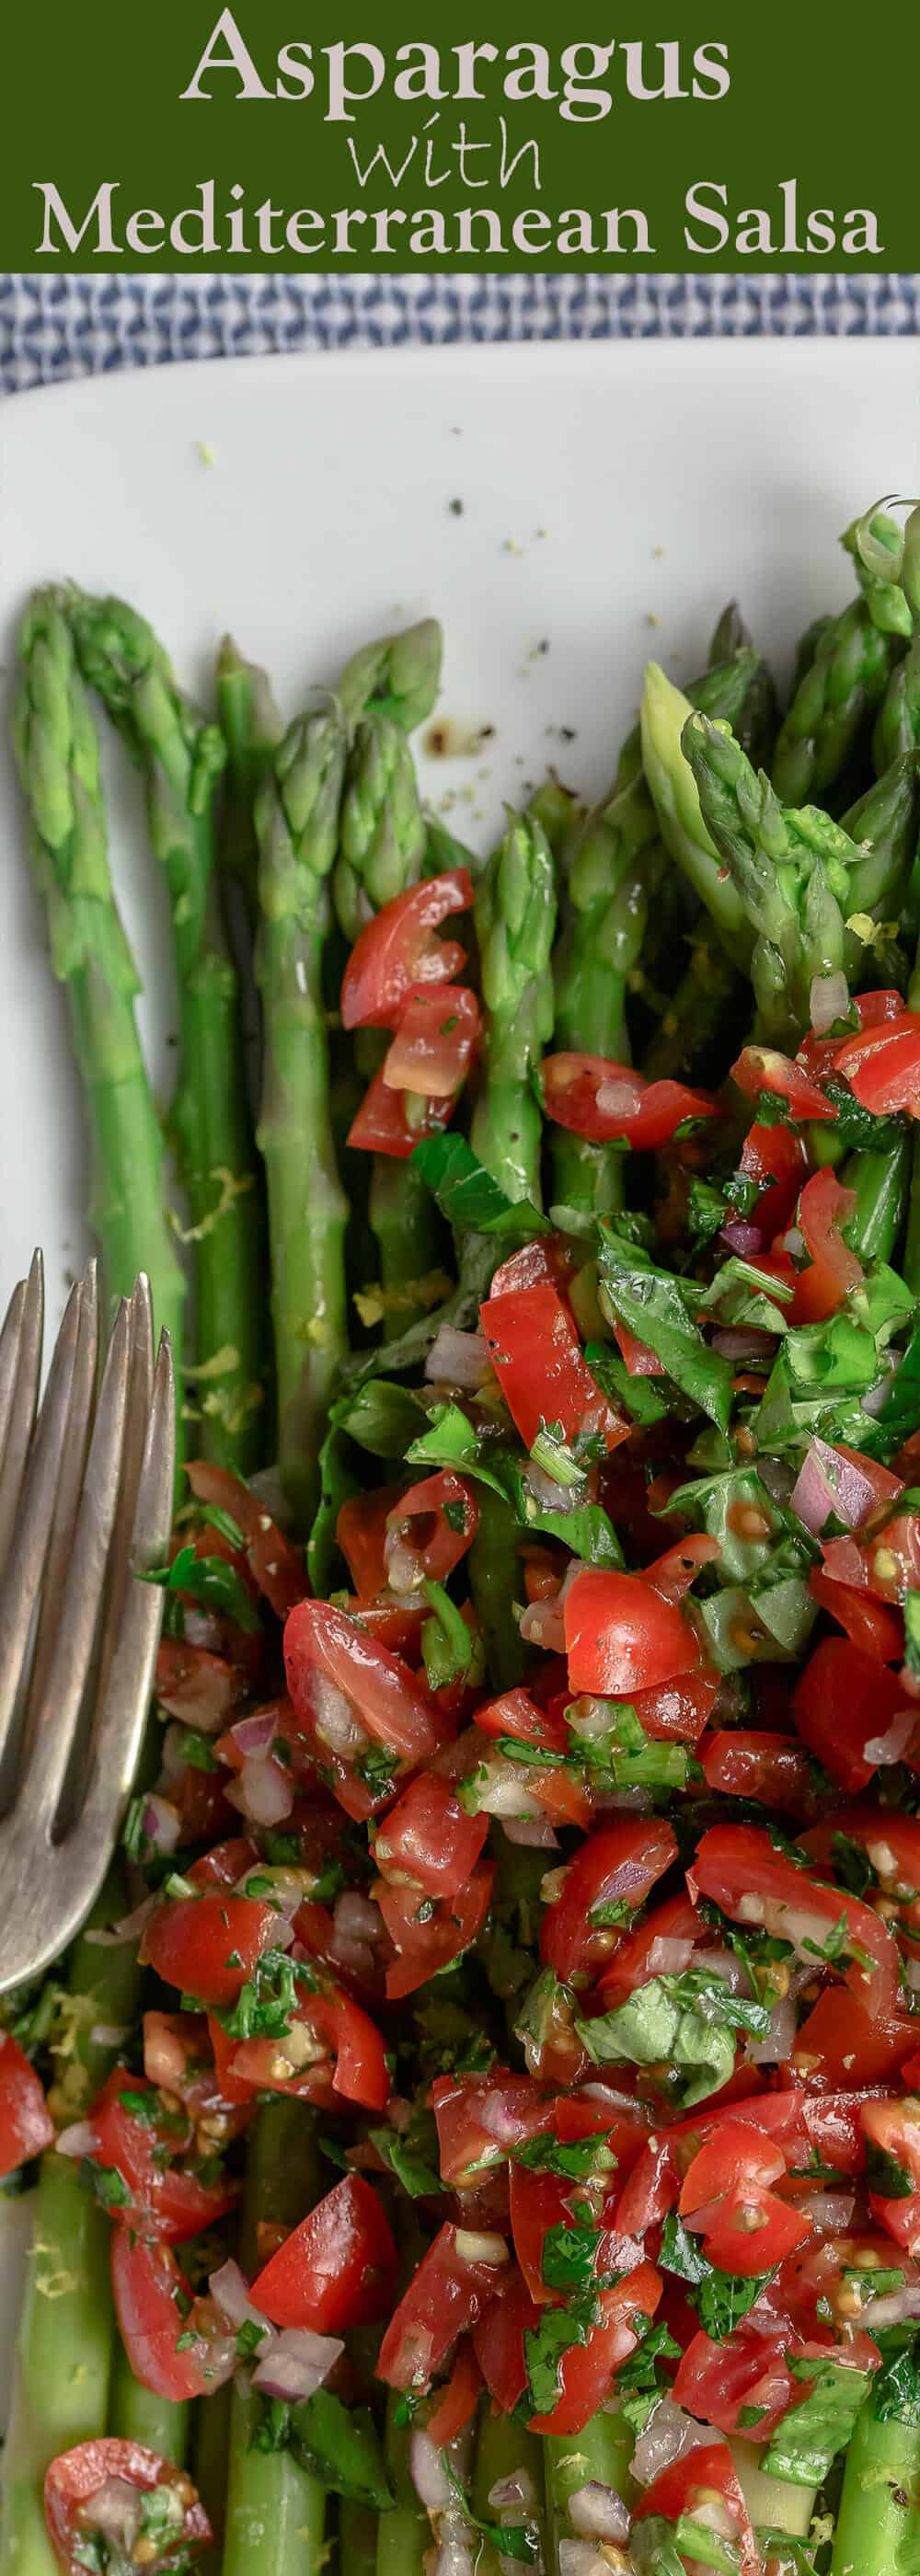 Easy Asparagus Recipe with Mediterranean Salsa | The Mediterranean Dish. Give asparagus a quick blanch, then top with this amazing Mediterranean salsa. Tons of flavor and texture! Serve as an appetizer, side, or Asparagus salad! Recipe from TheMediterraneanDish.com #asparagus #asparagusrecipe #mediterraneandiet #mediterraneanrecipe #mediterranean #mediterraneanfood #glutenfreerecipe #easyrecipe #sidedish #mediterraneansalad #healthyrecipes #veganrecipes